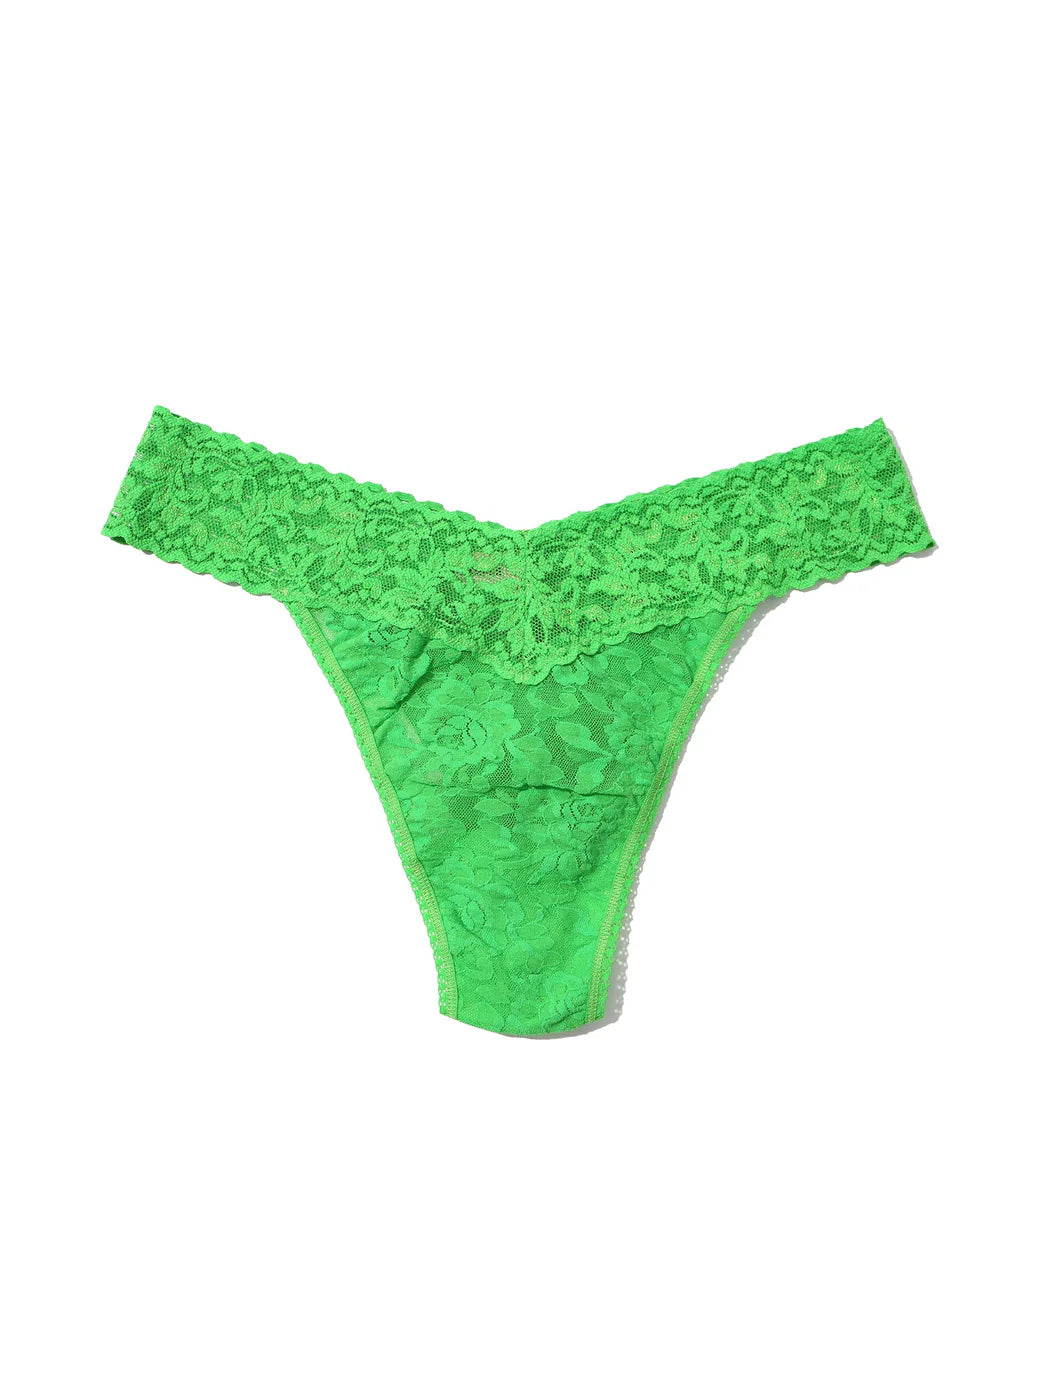 Buy four-leaf-clover Hanky Panky Signature Lace Original Rise Thong-Packaged 4811p